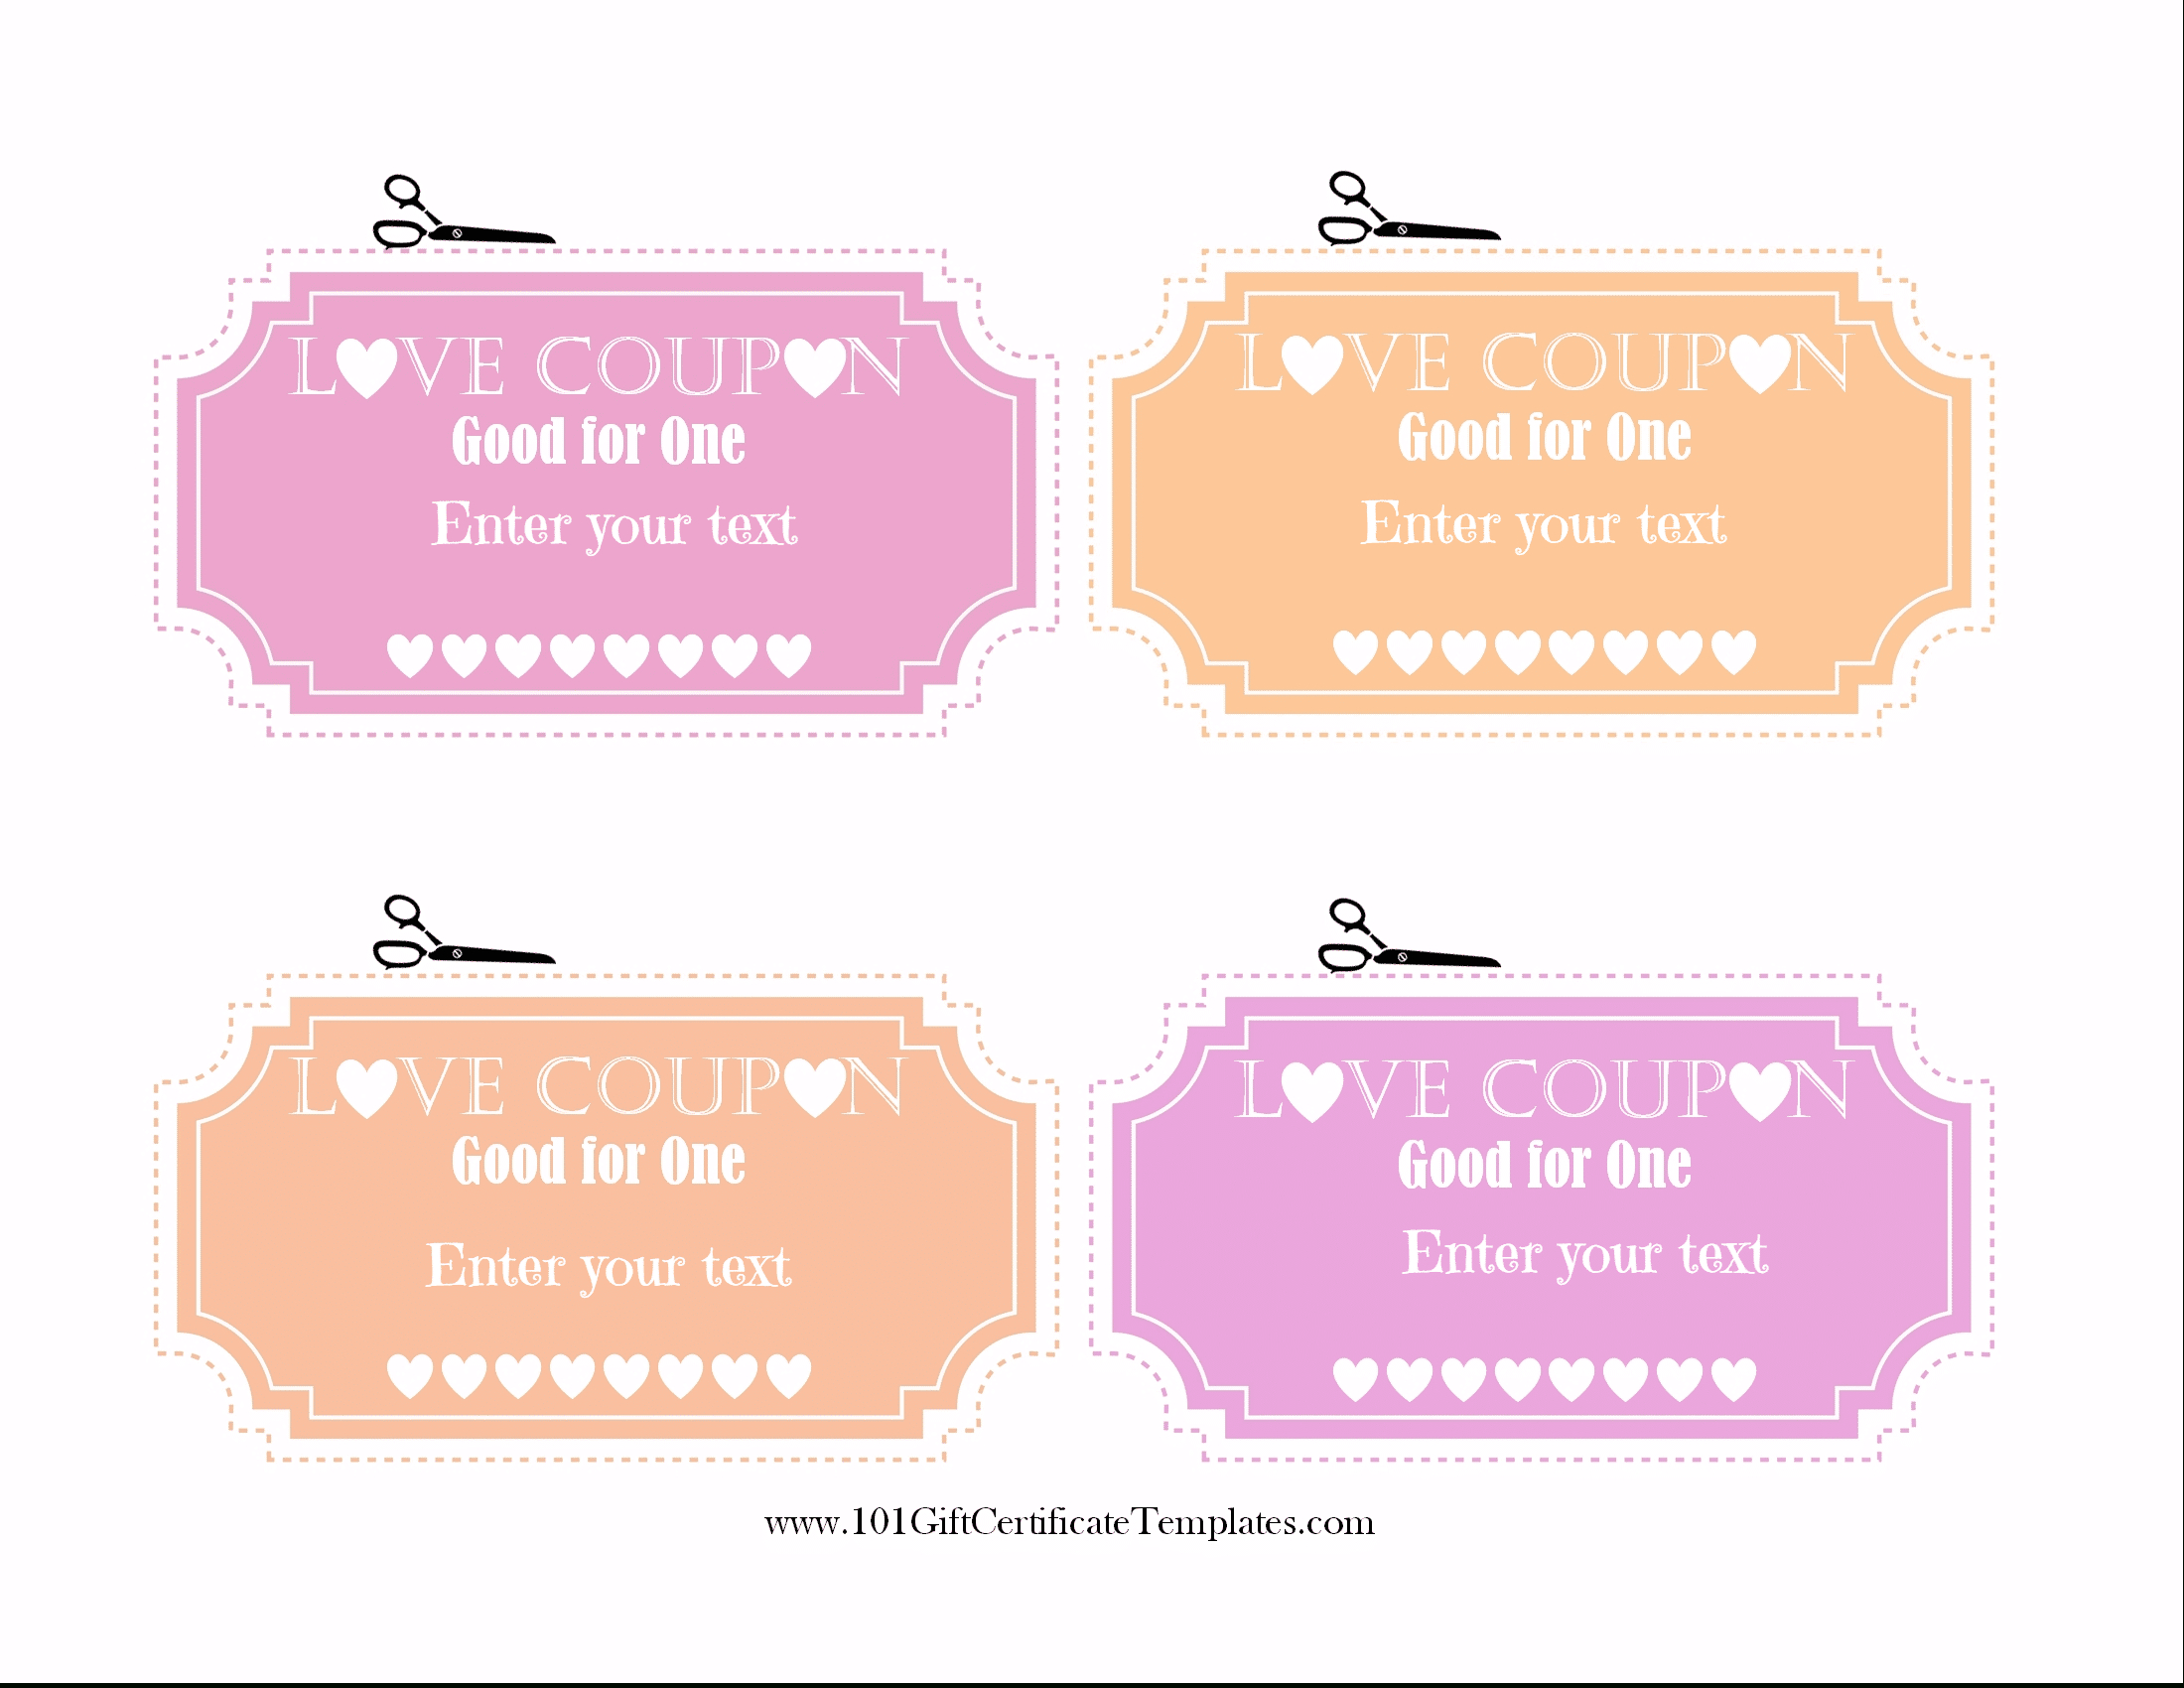 Free Editable Love Coupons For Him Or Her - Make Your Own Printable Coupons For Free